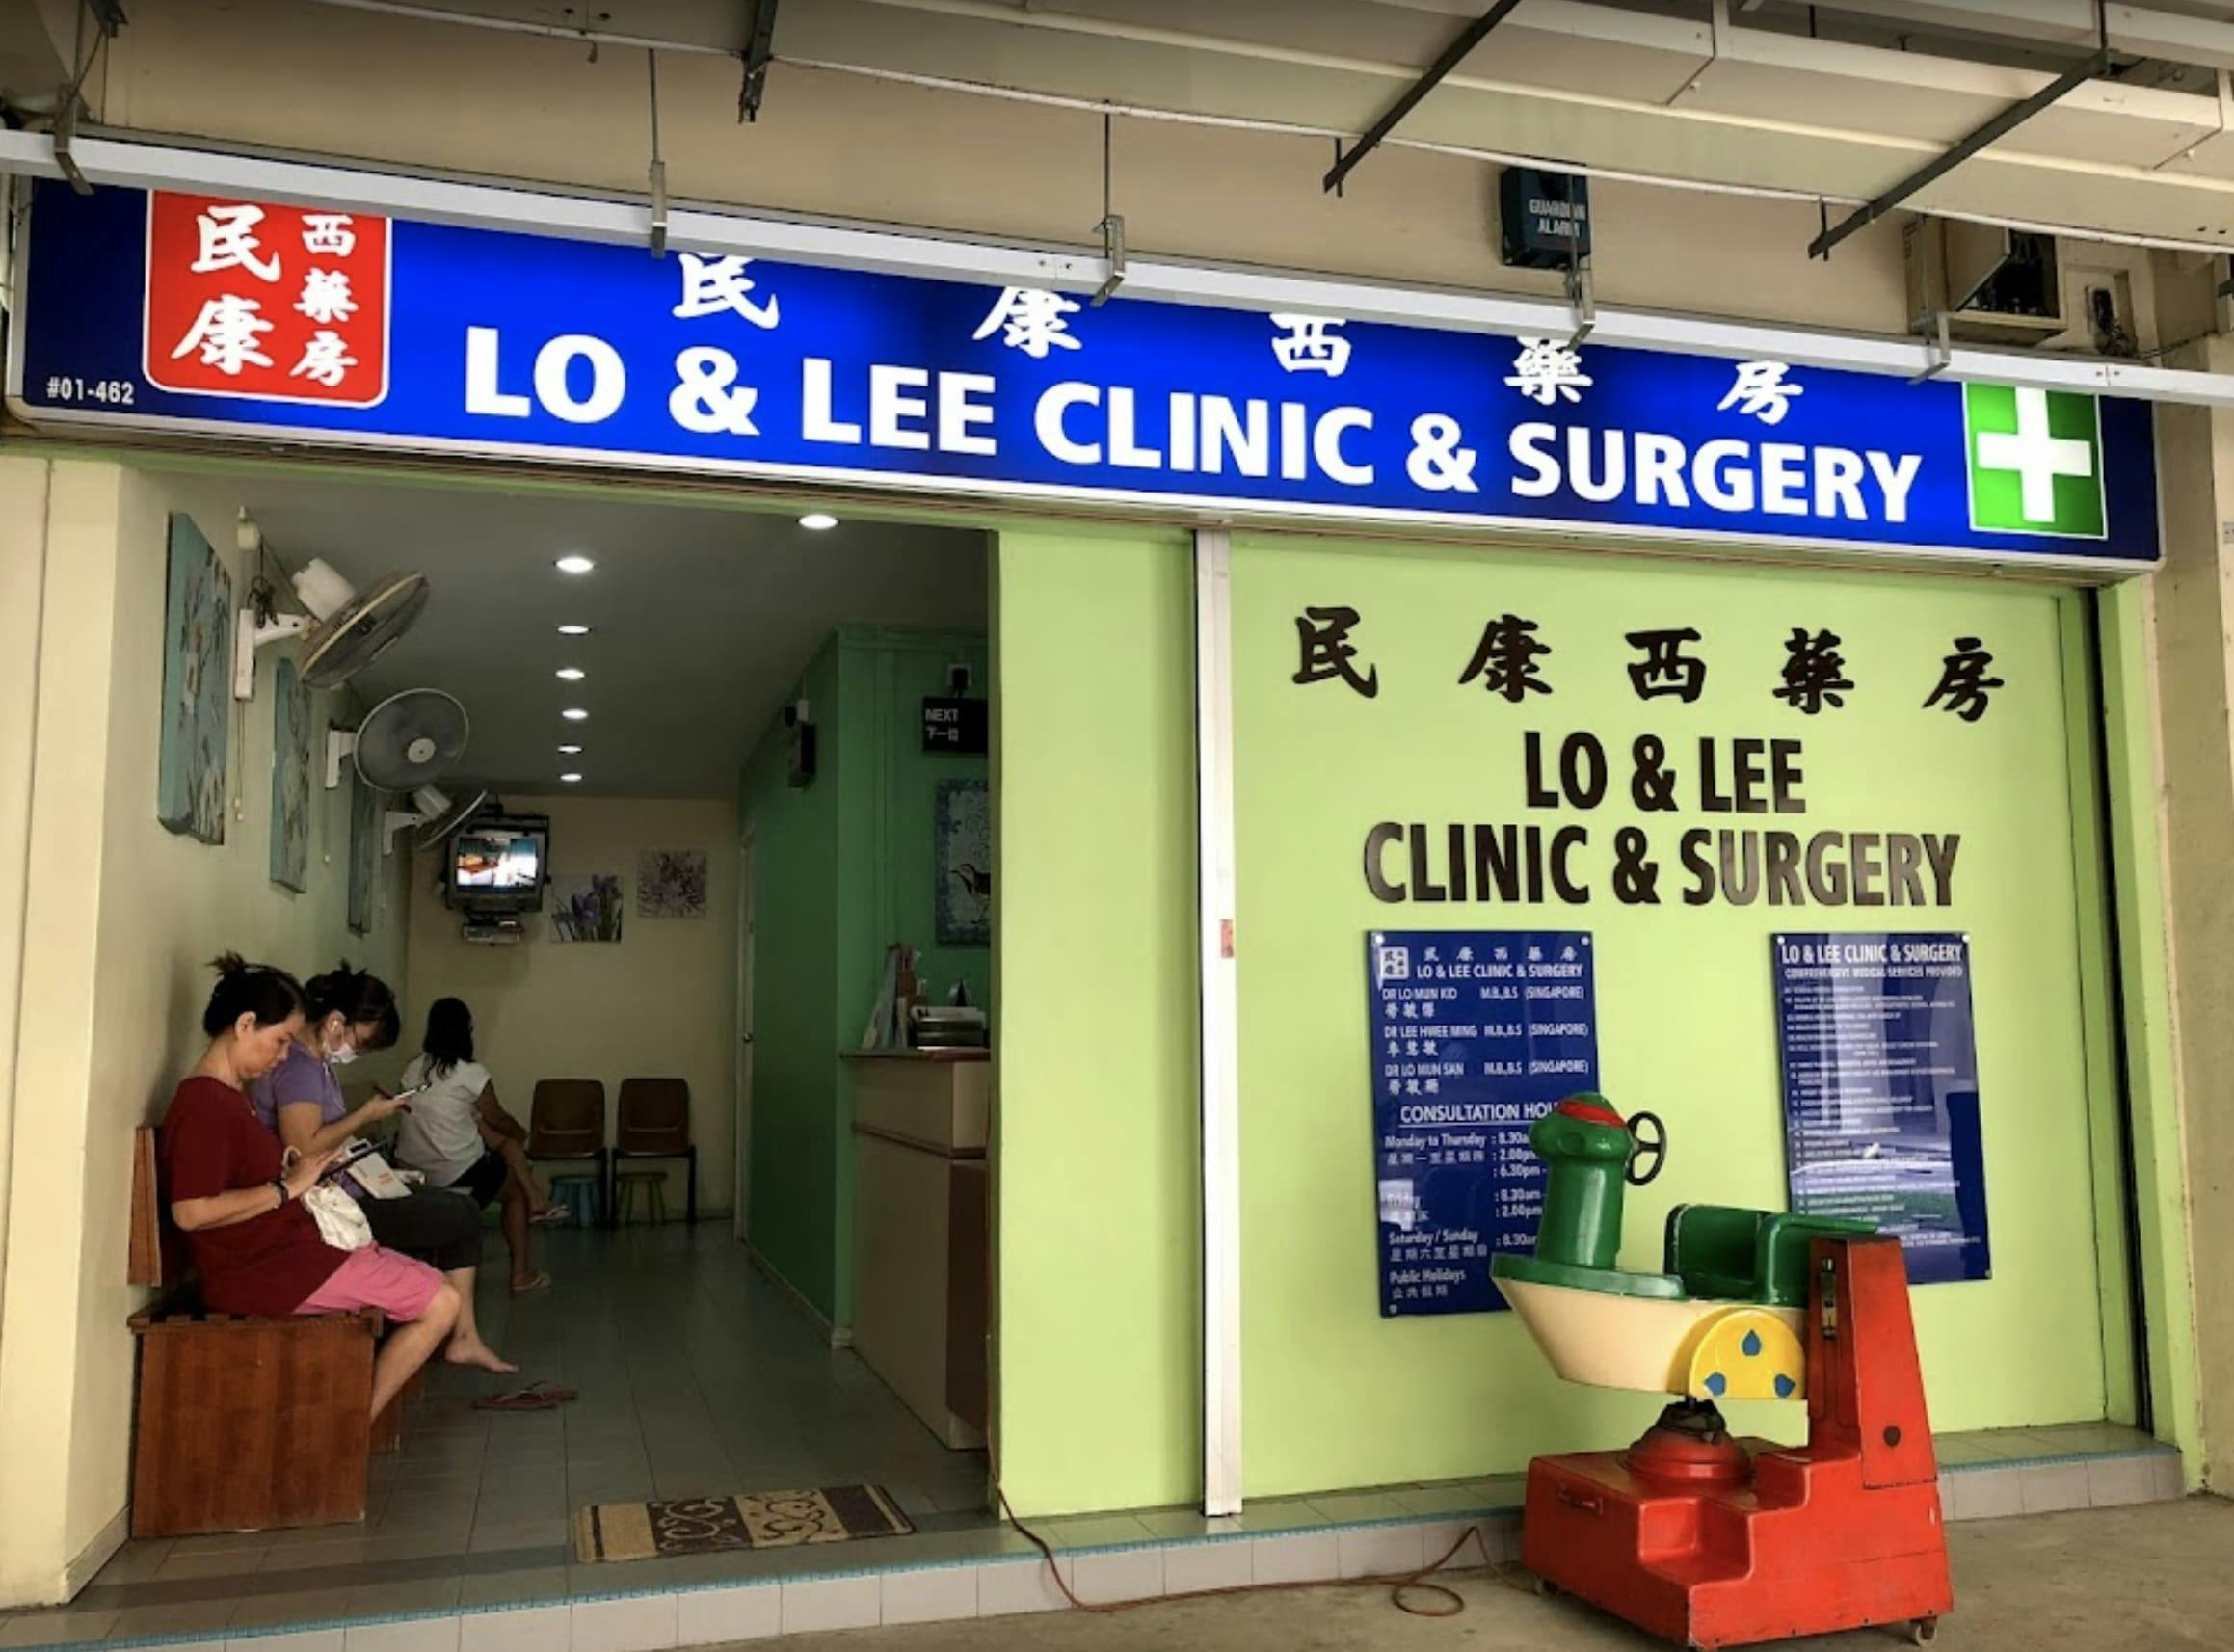 Lo & Lee Clinic & Surgery | General Practitioner | Singapore | ClinicGeek